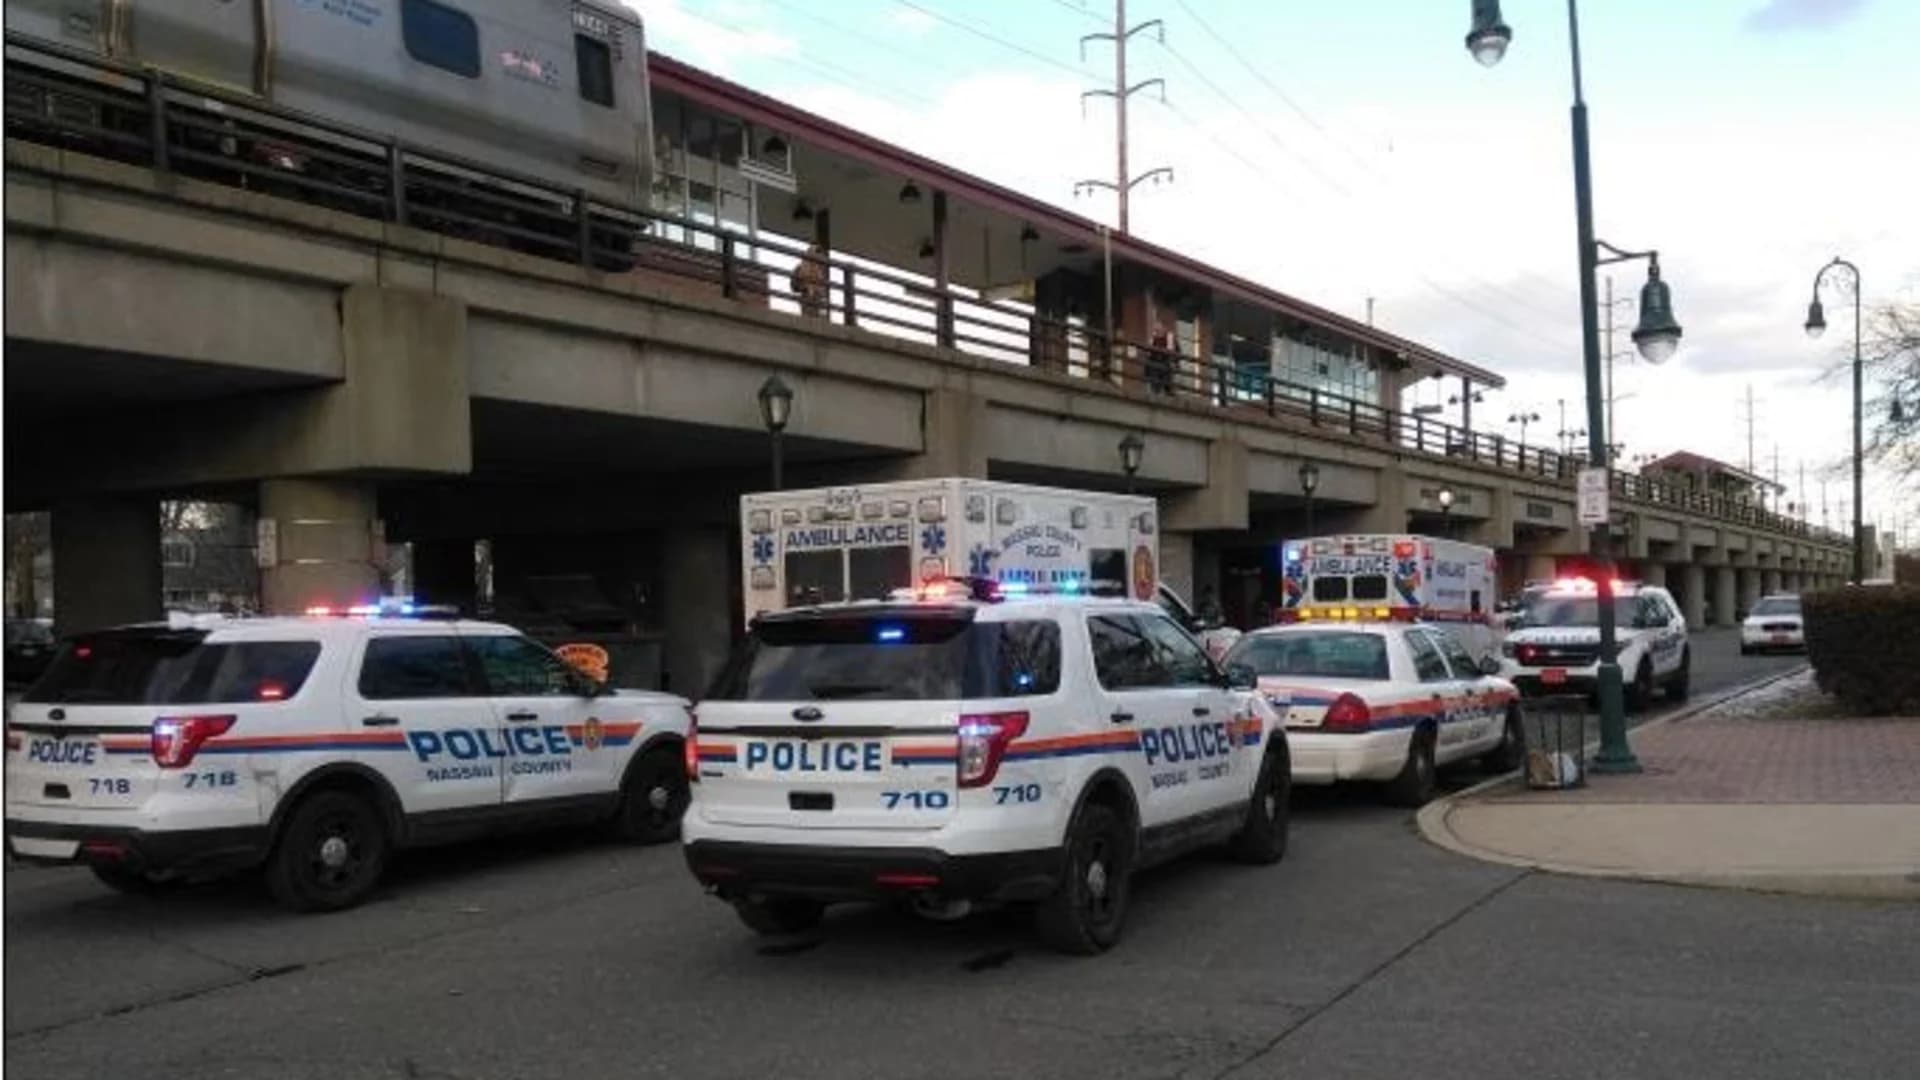 LIRR: Service restored after train hits person on tracks